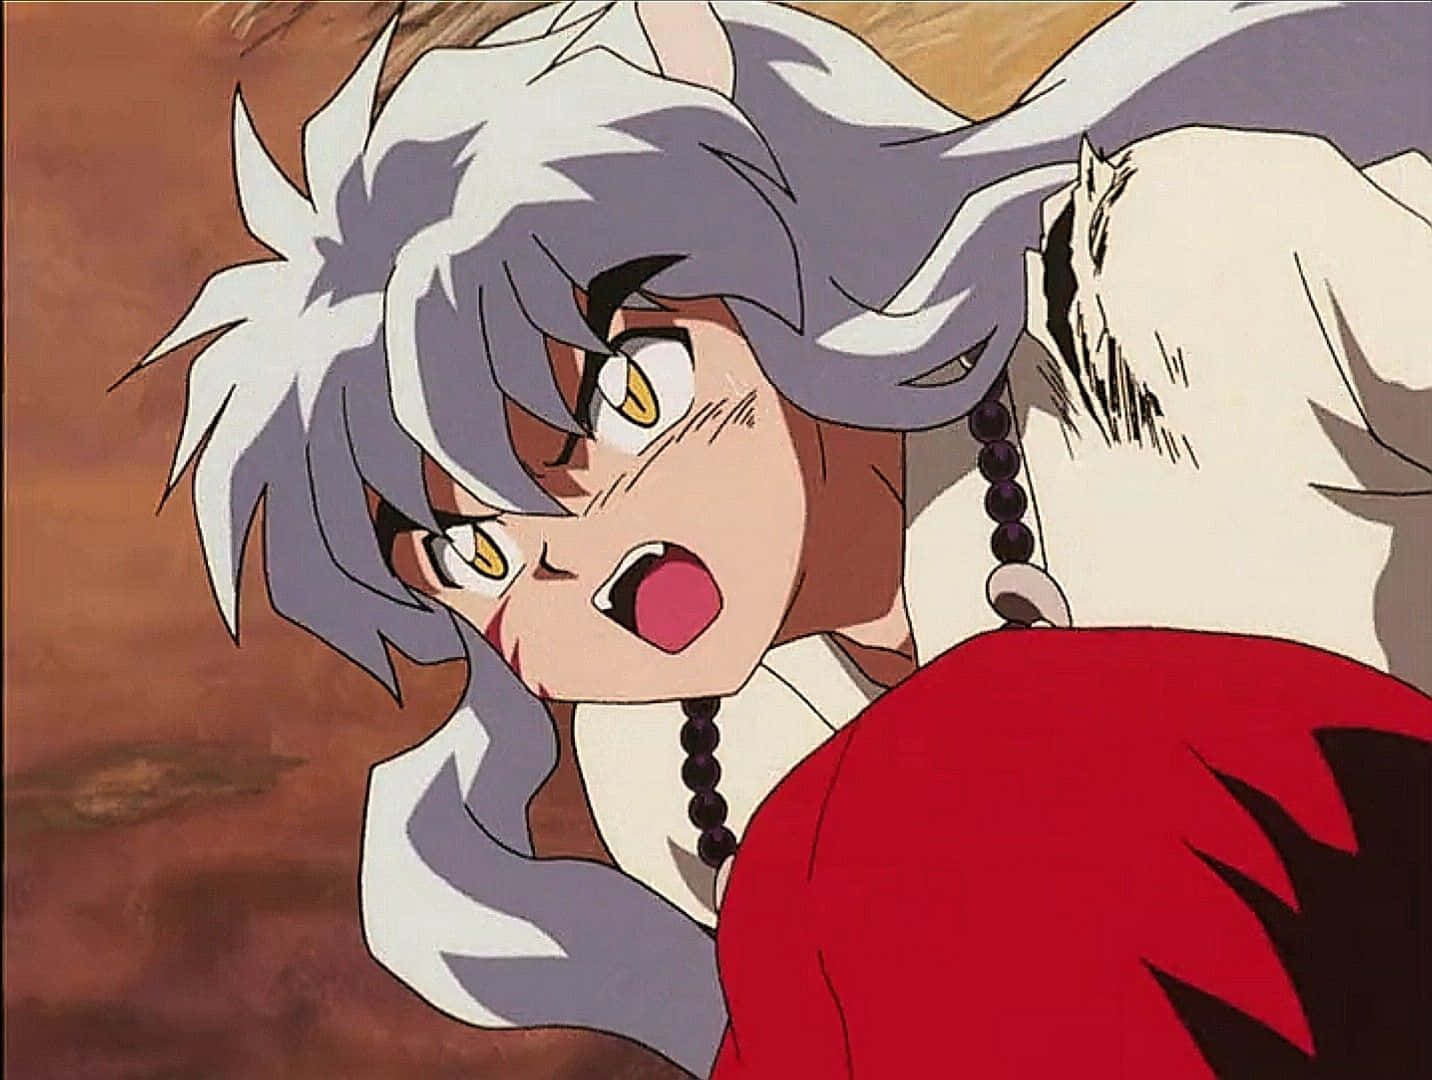 Inuyasha and Shippo sharing a moment together Wallpaper